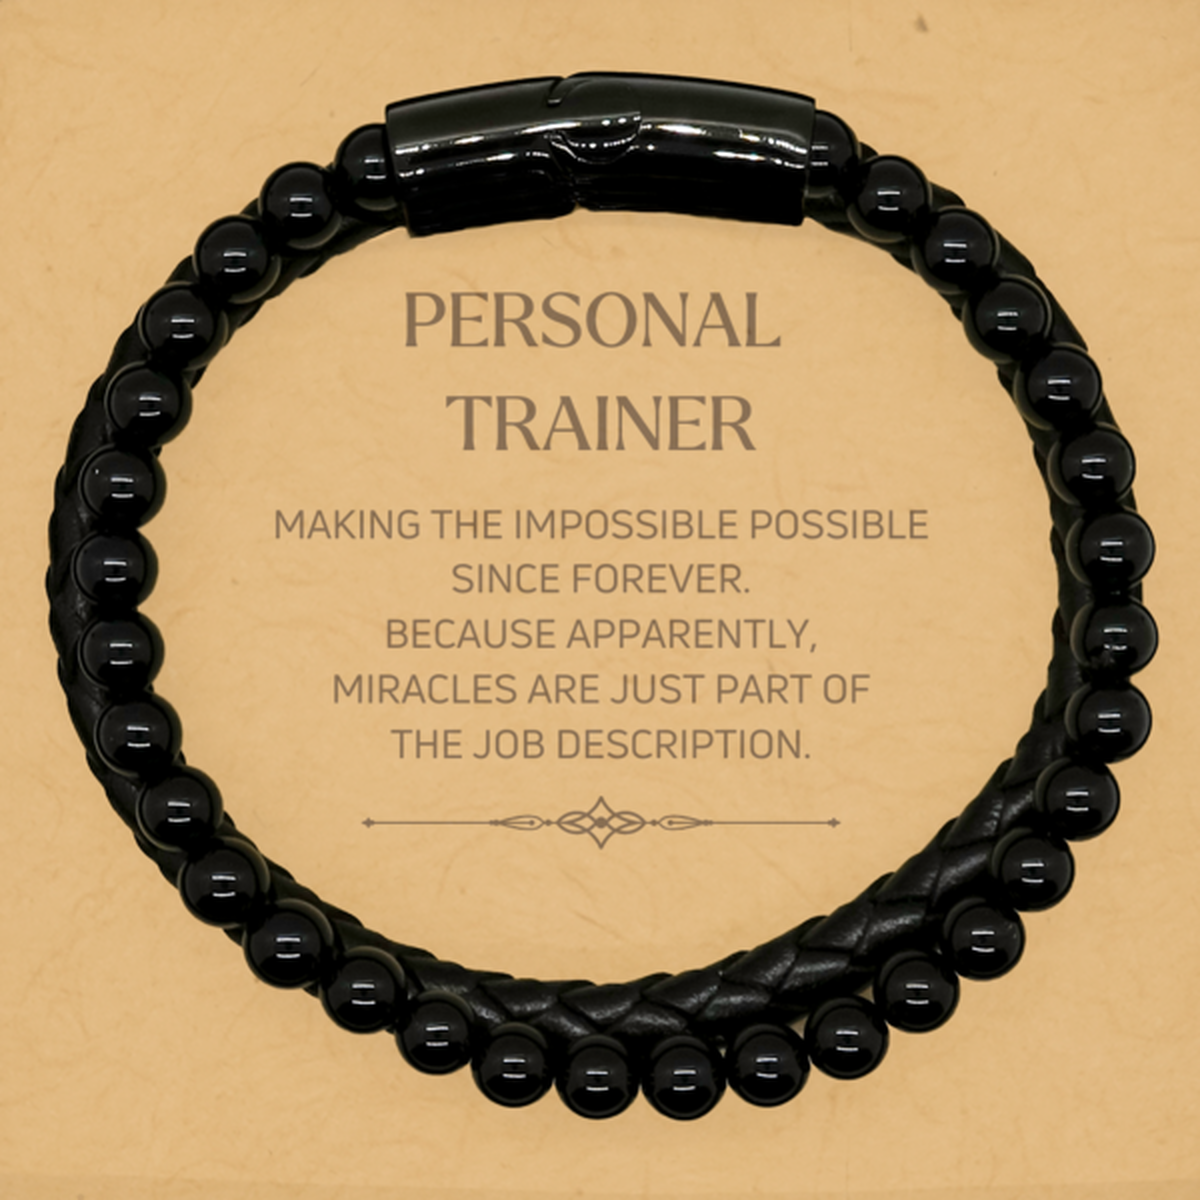 Funny Personal Trainer Gifts, Miracles are just part of the job description, Inspirational Birthday Stone Leather Bracelets For Personal Trainer, Men, Women, Coworkers, Friends, Boss